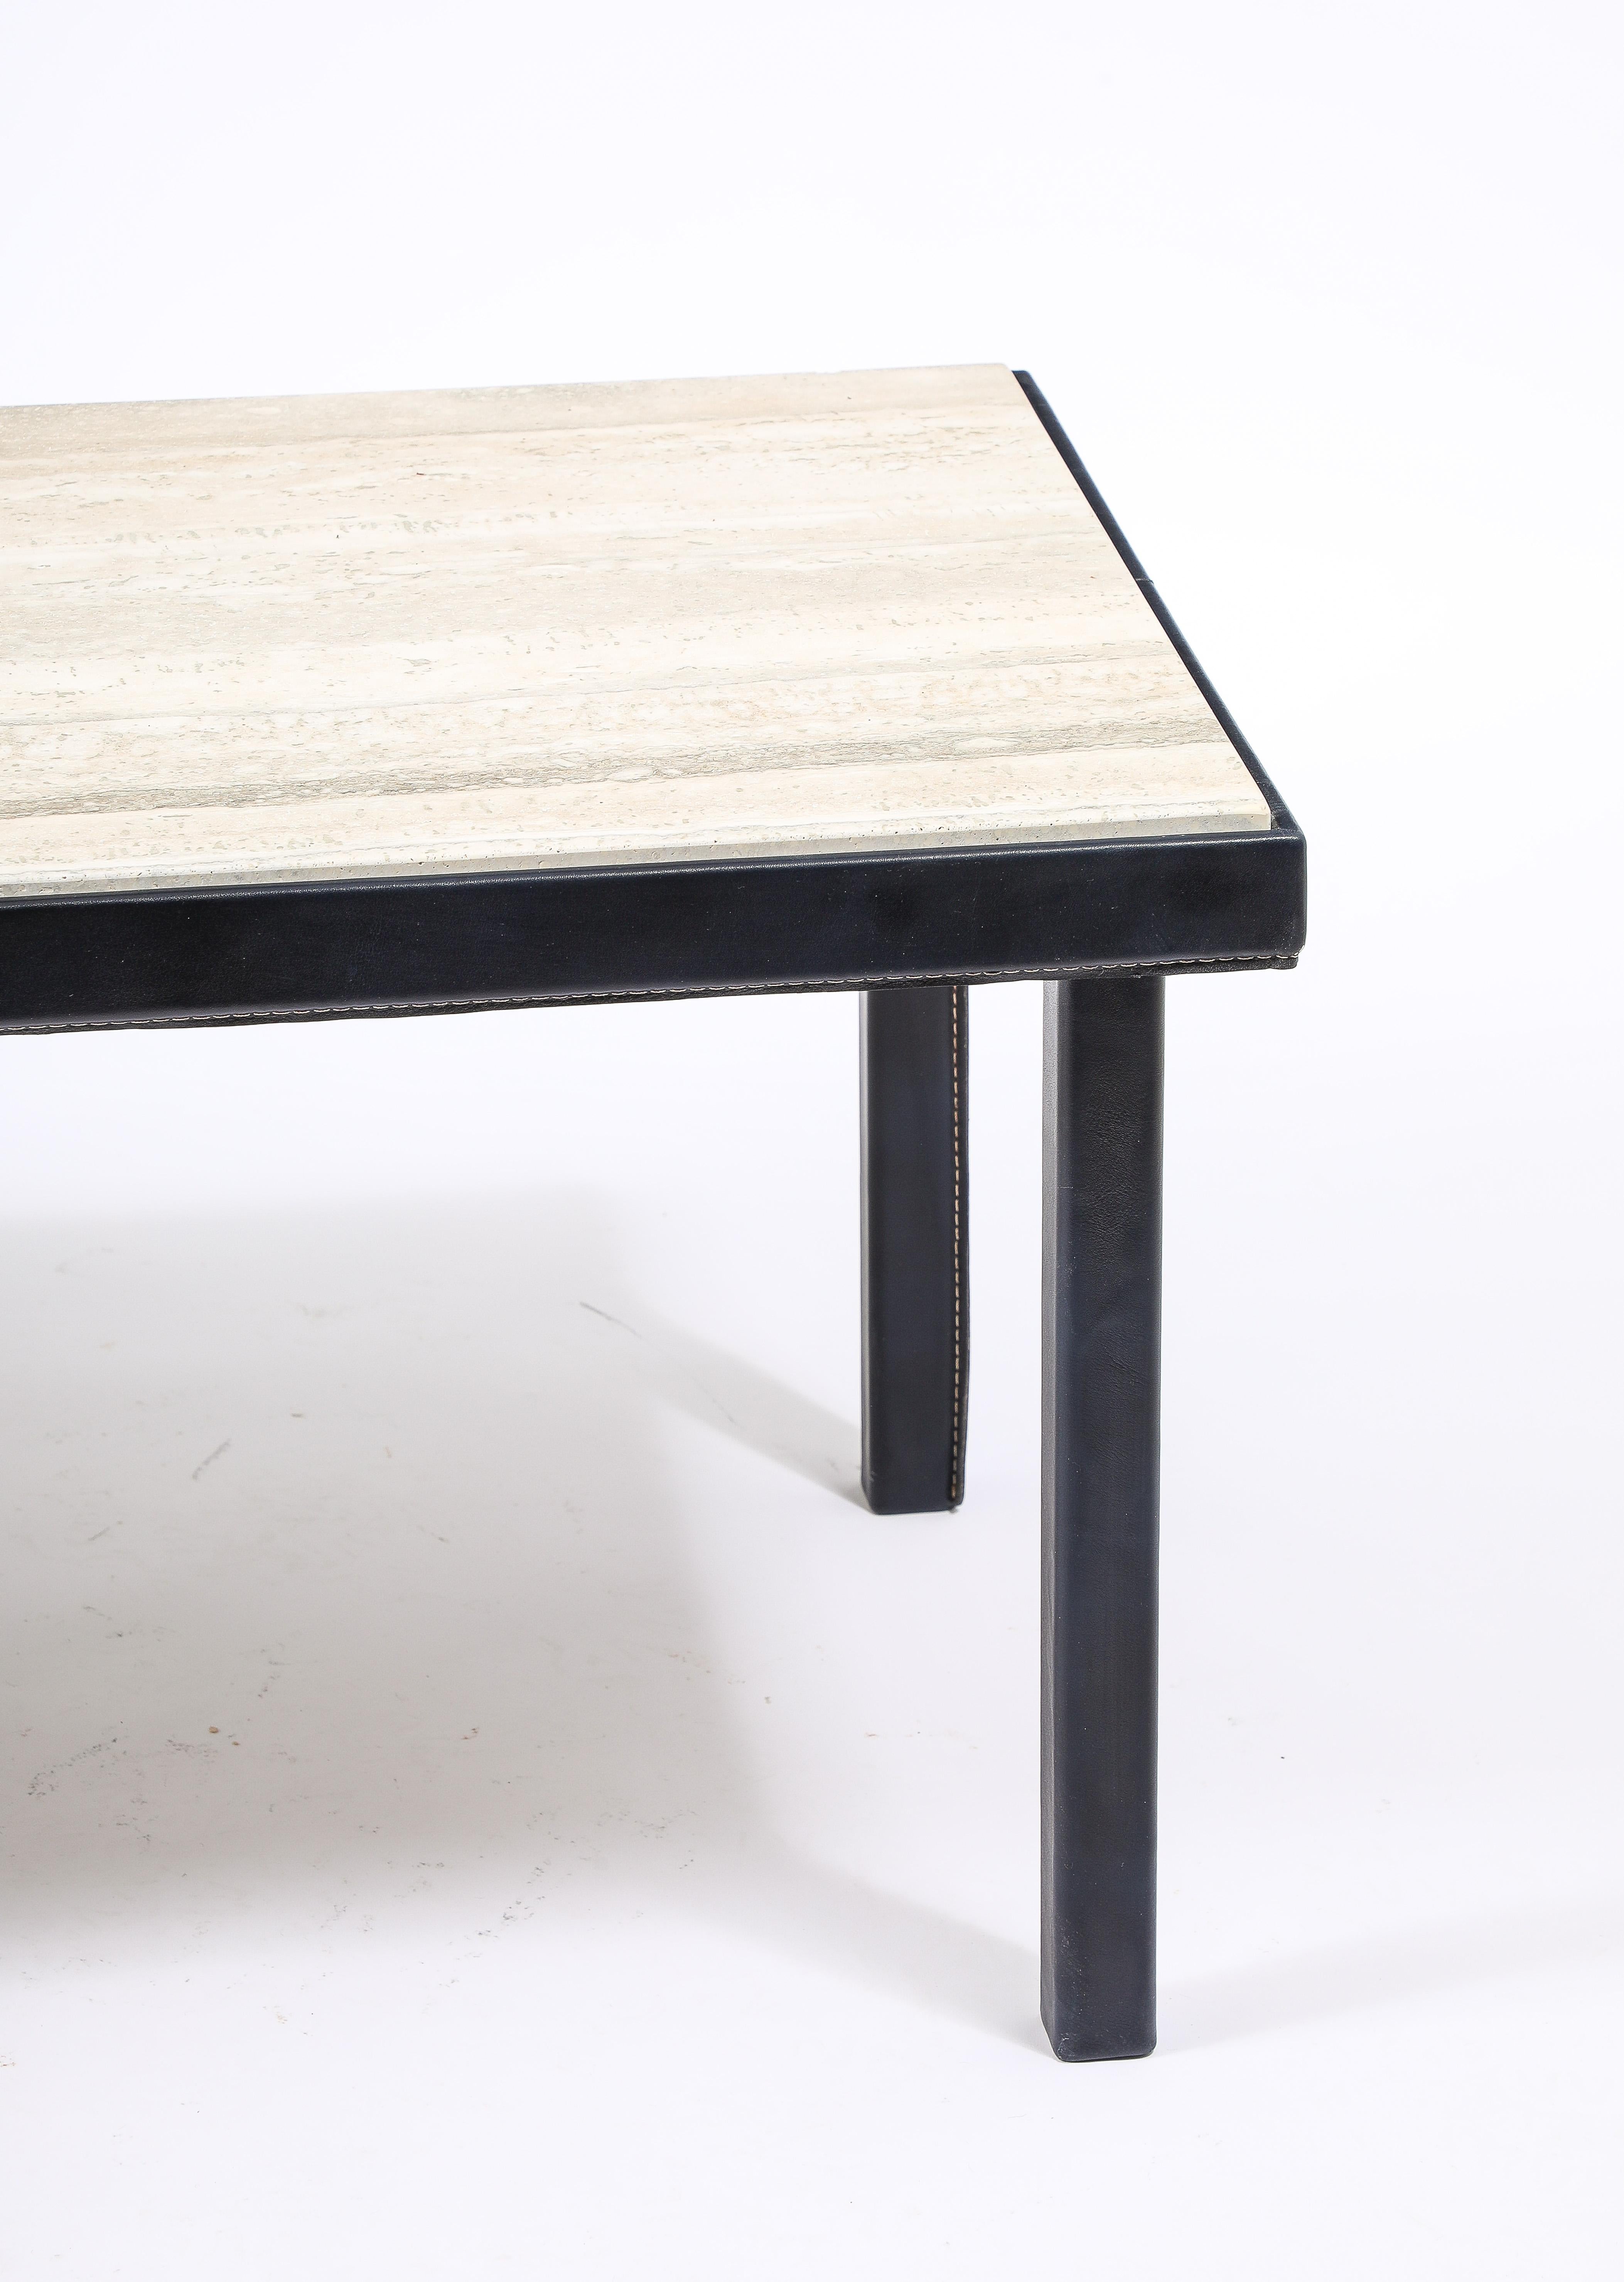 Jacques Adnet Stitched Blue Leather & Travertine Coffee Table, France 1950's For Sale 4